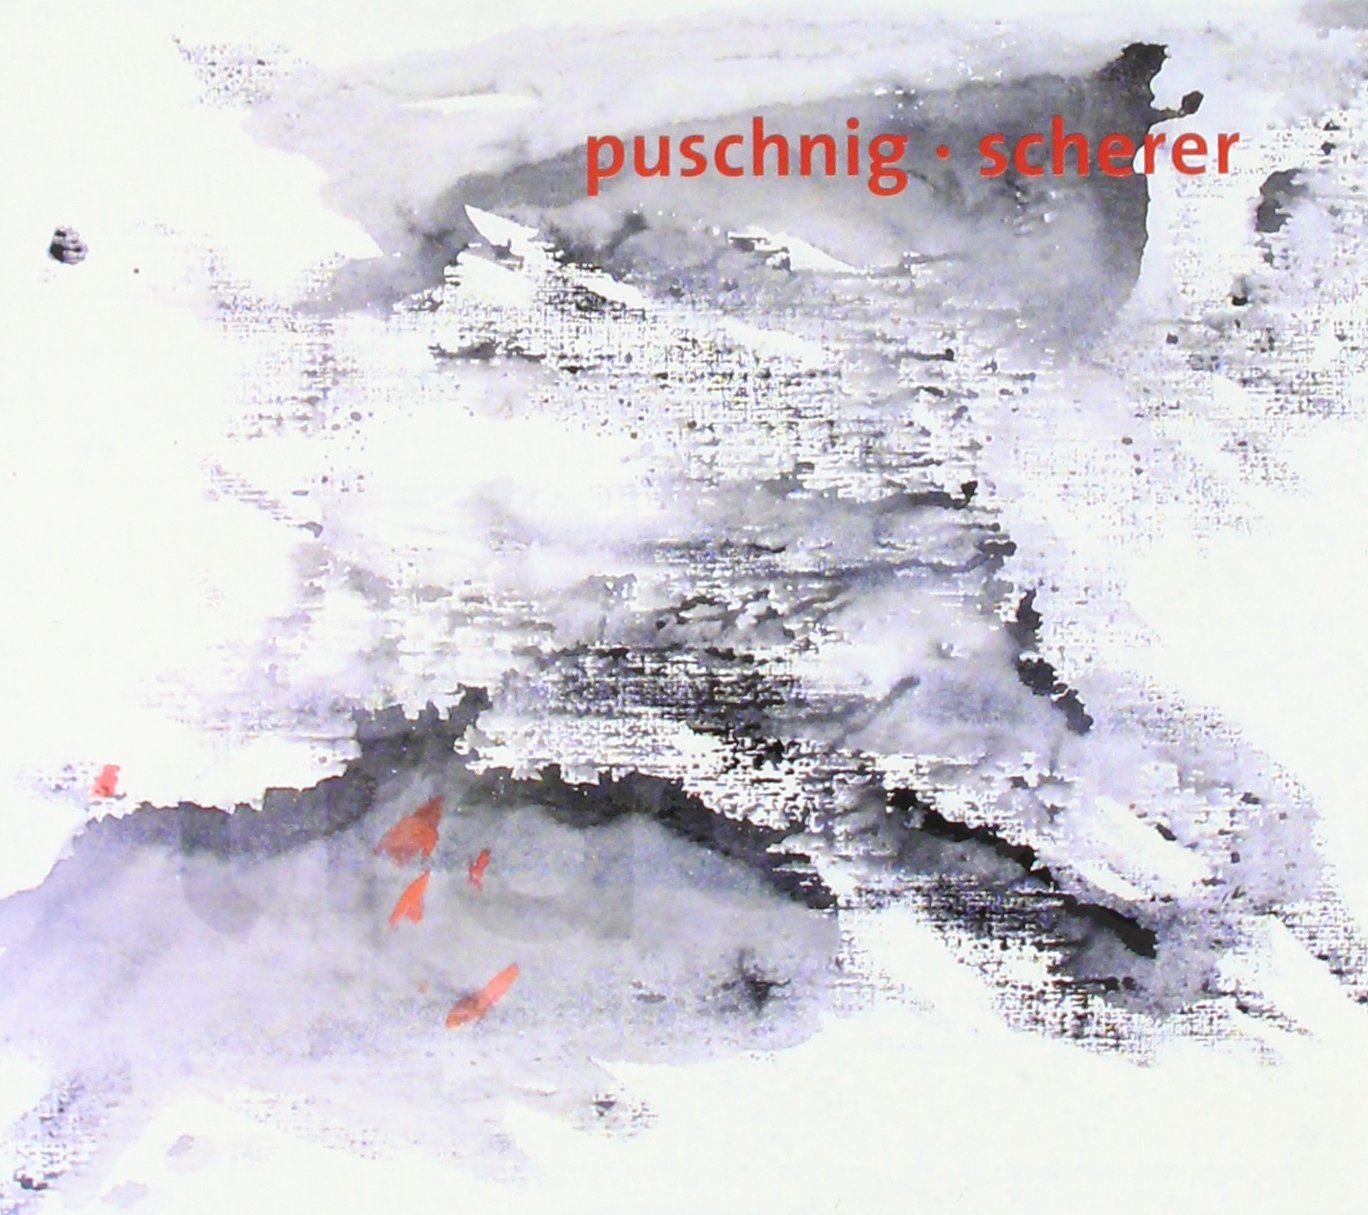 WOLFGANG PUSCHNIG - Wolfgang Puschnig & Uli Scherer : Traces cover 